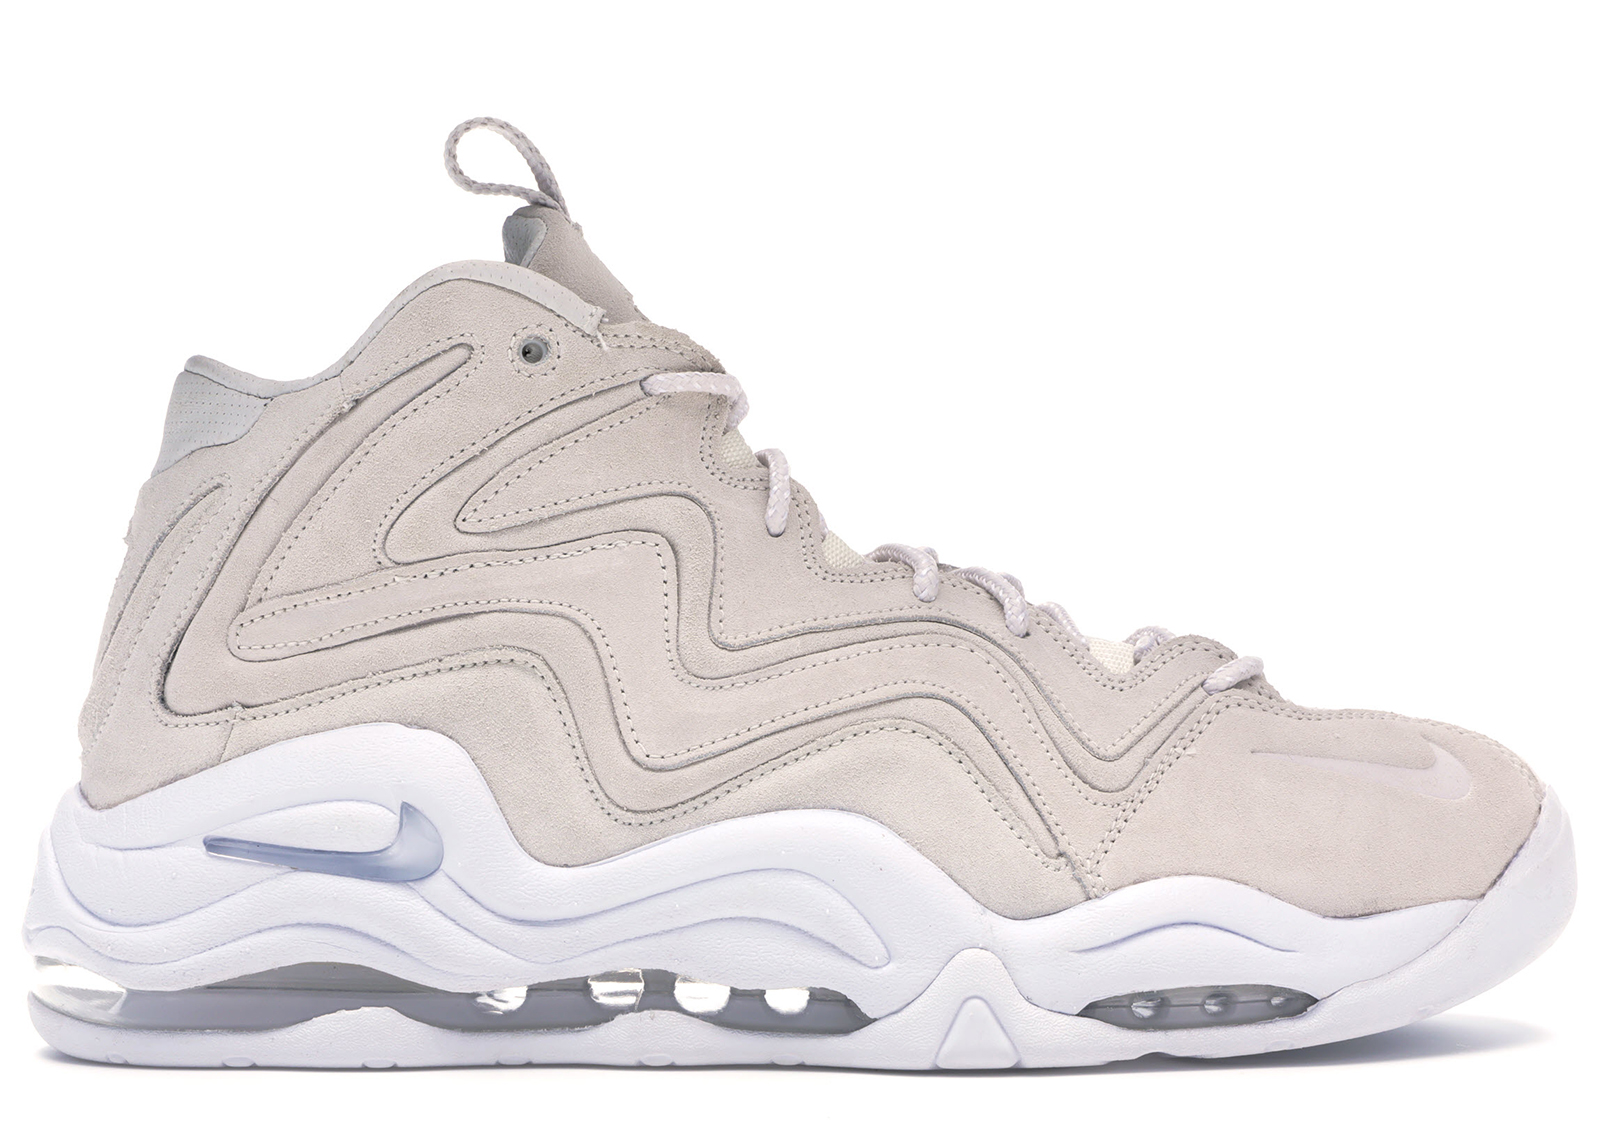 Nike Air Pippen QS Kith Friends and Family Men's - AH1070-002 - US